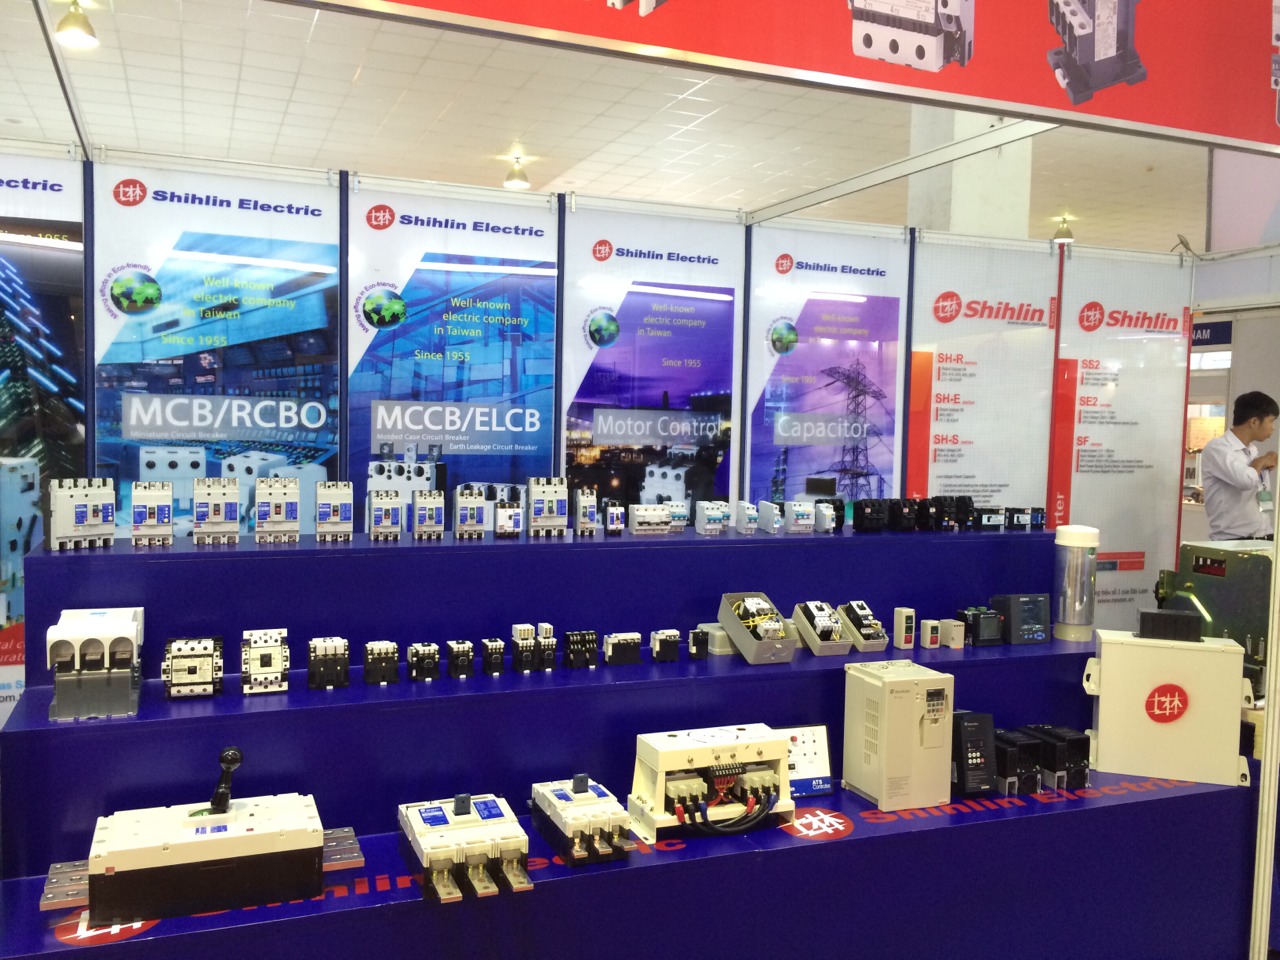 Shihlin Electric products at The 7th International Exhibition on Electrical Technology & Equipment- Vietnam ETE 2014